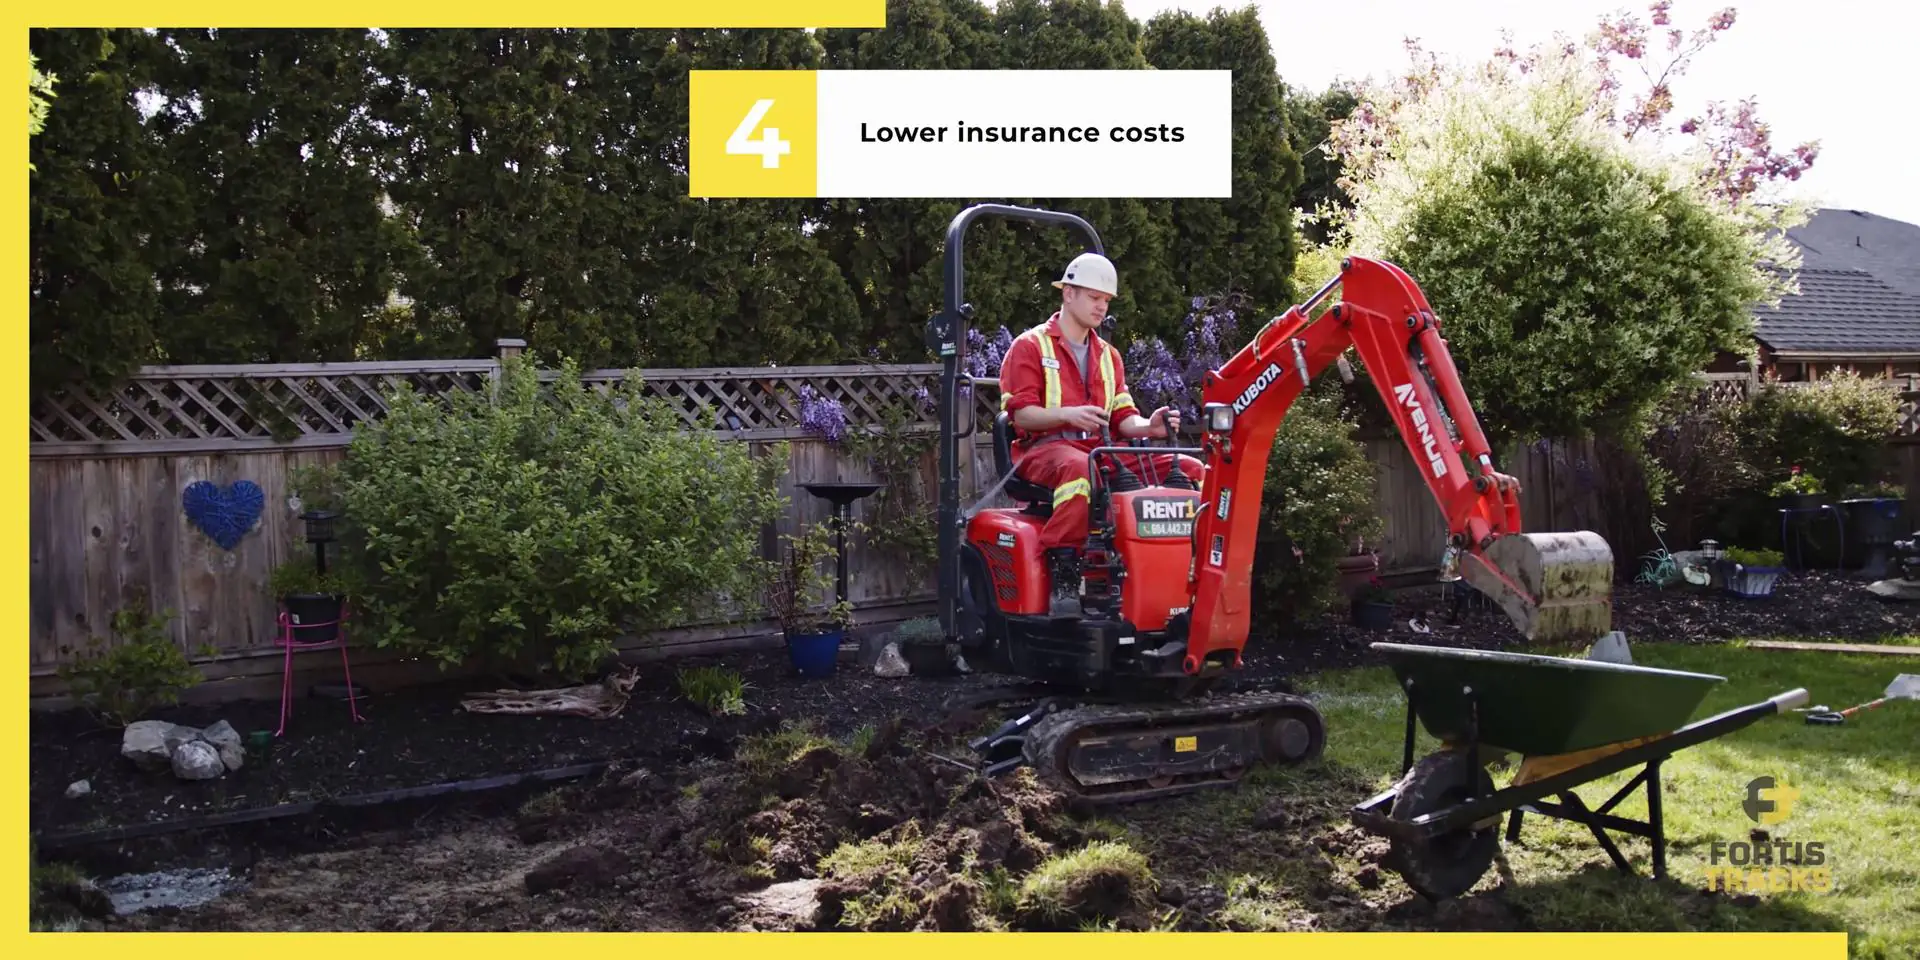 heavy equipment operator uding a Kubota mini excavator to dig up a back yard with a caption that says "lower insurance costs"